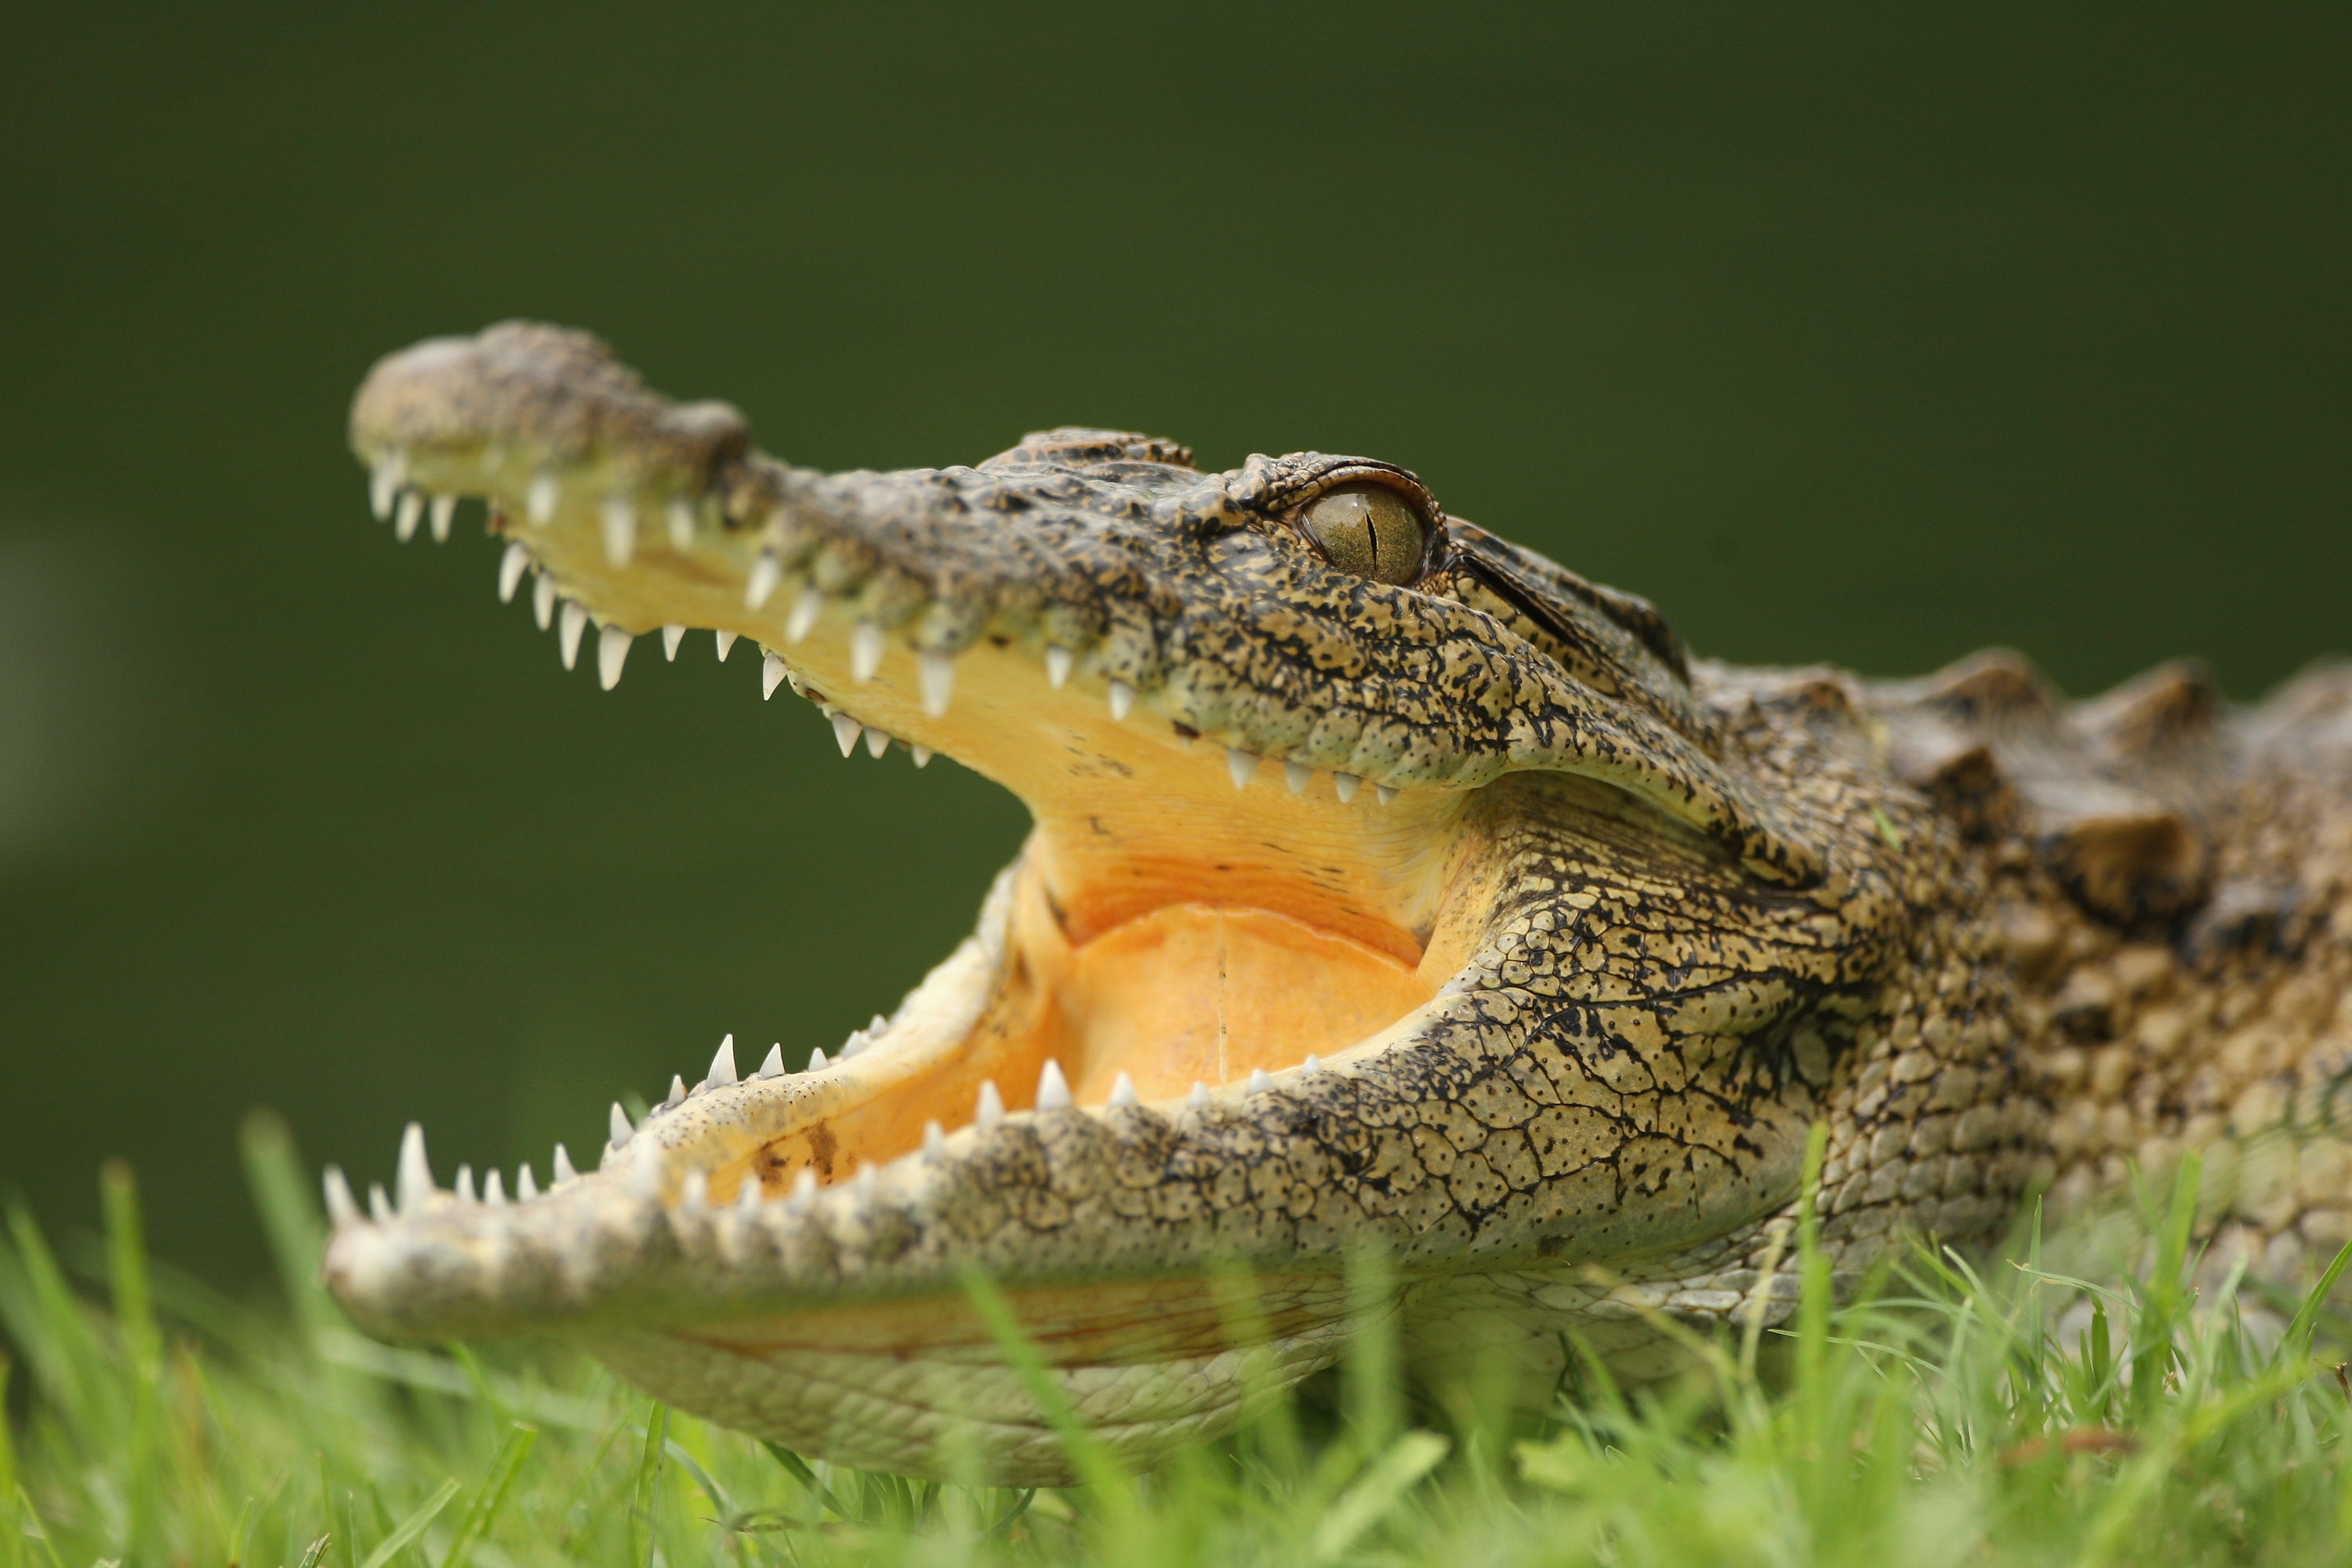 Australian Man Survives Crocodile Attack by Poking It in the Eyes | Time